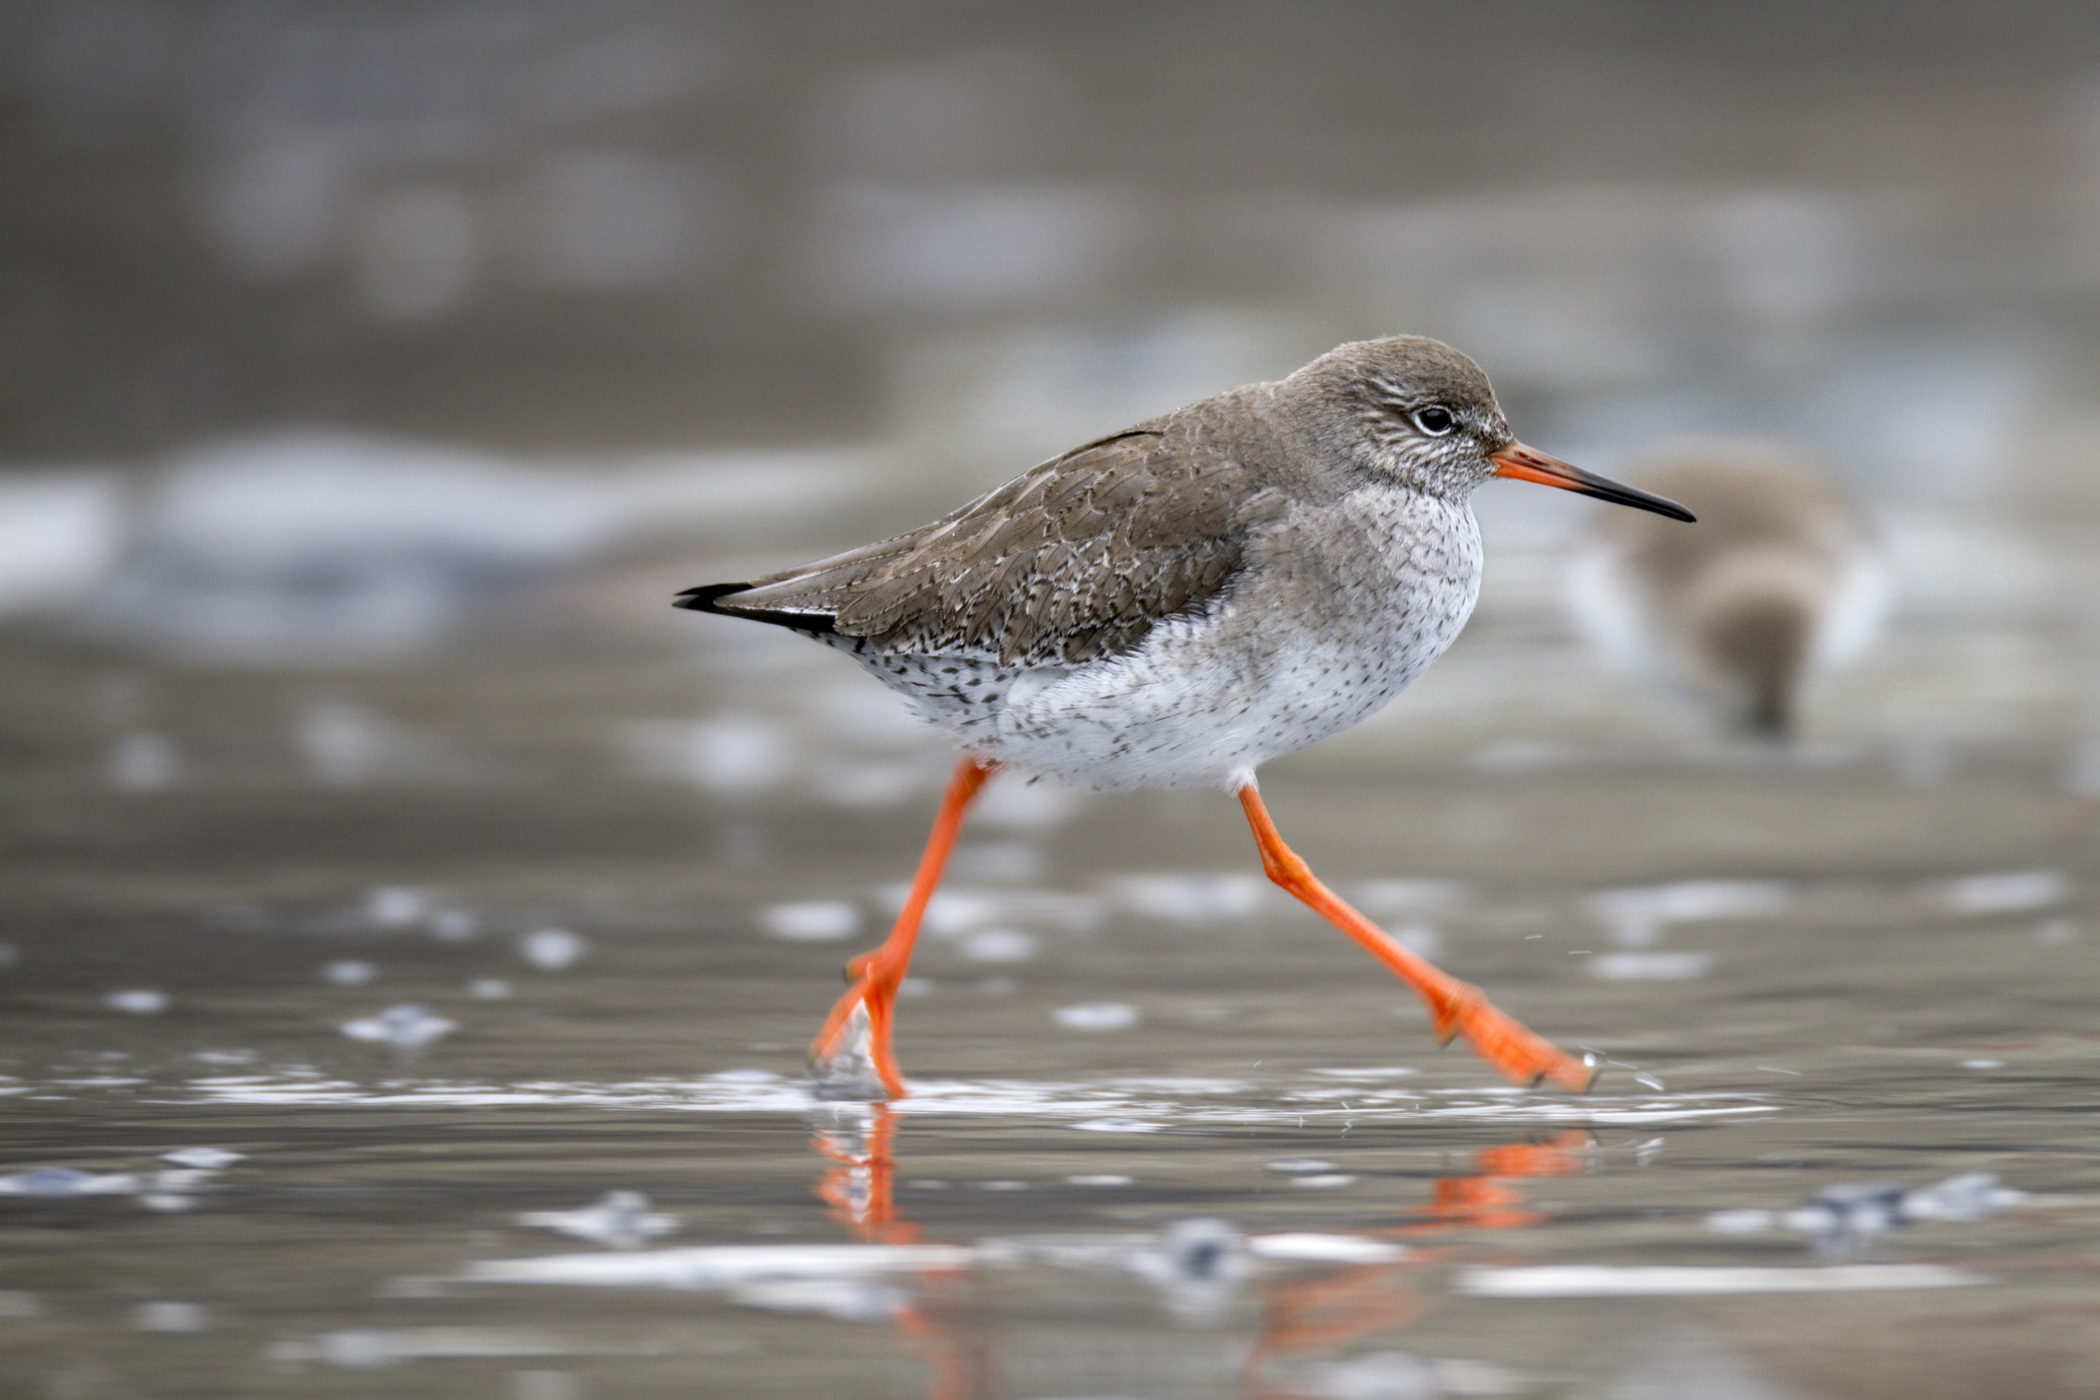 Redshanks have distinctively coloured legs and are common at Hayle except in May/June when most wading birds depart to their breeding grounds. Credit: David Chapman